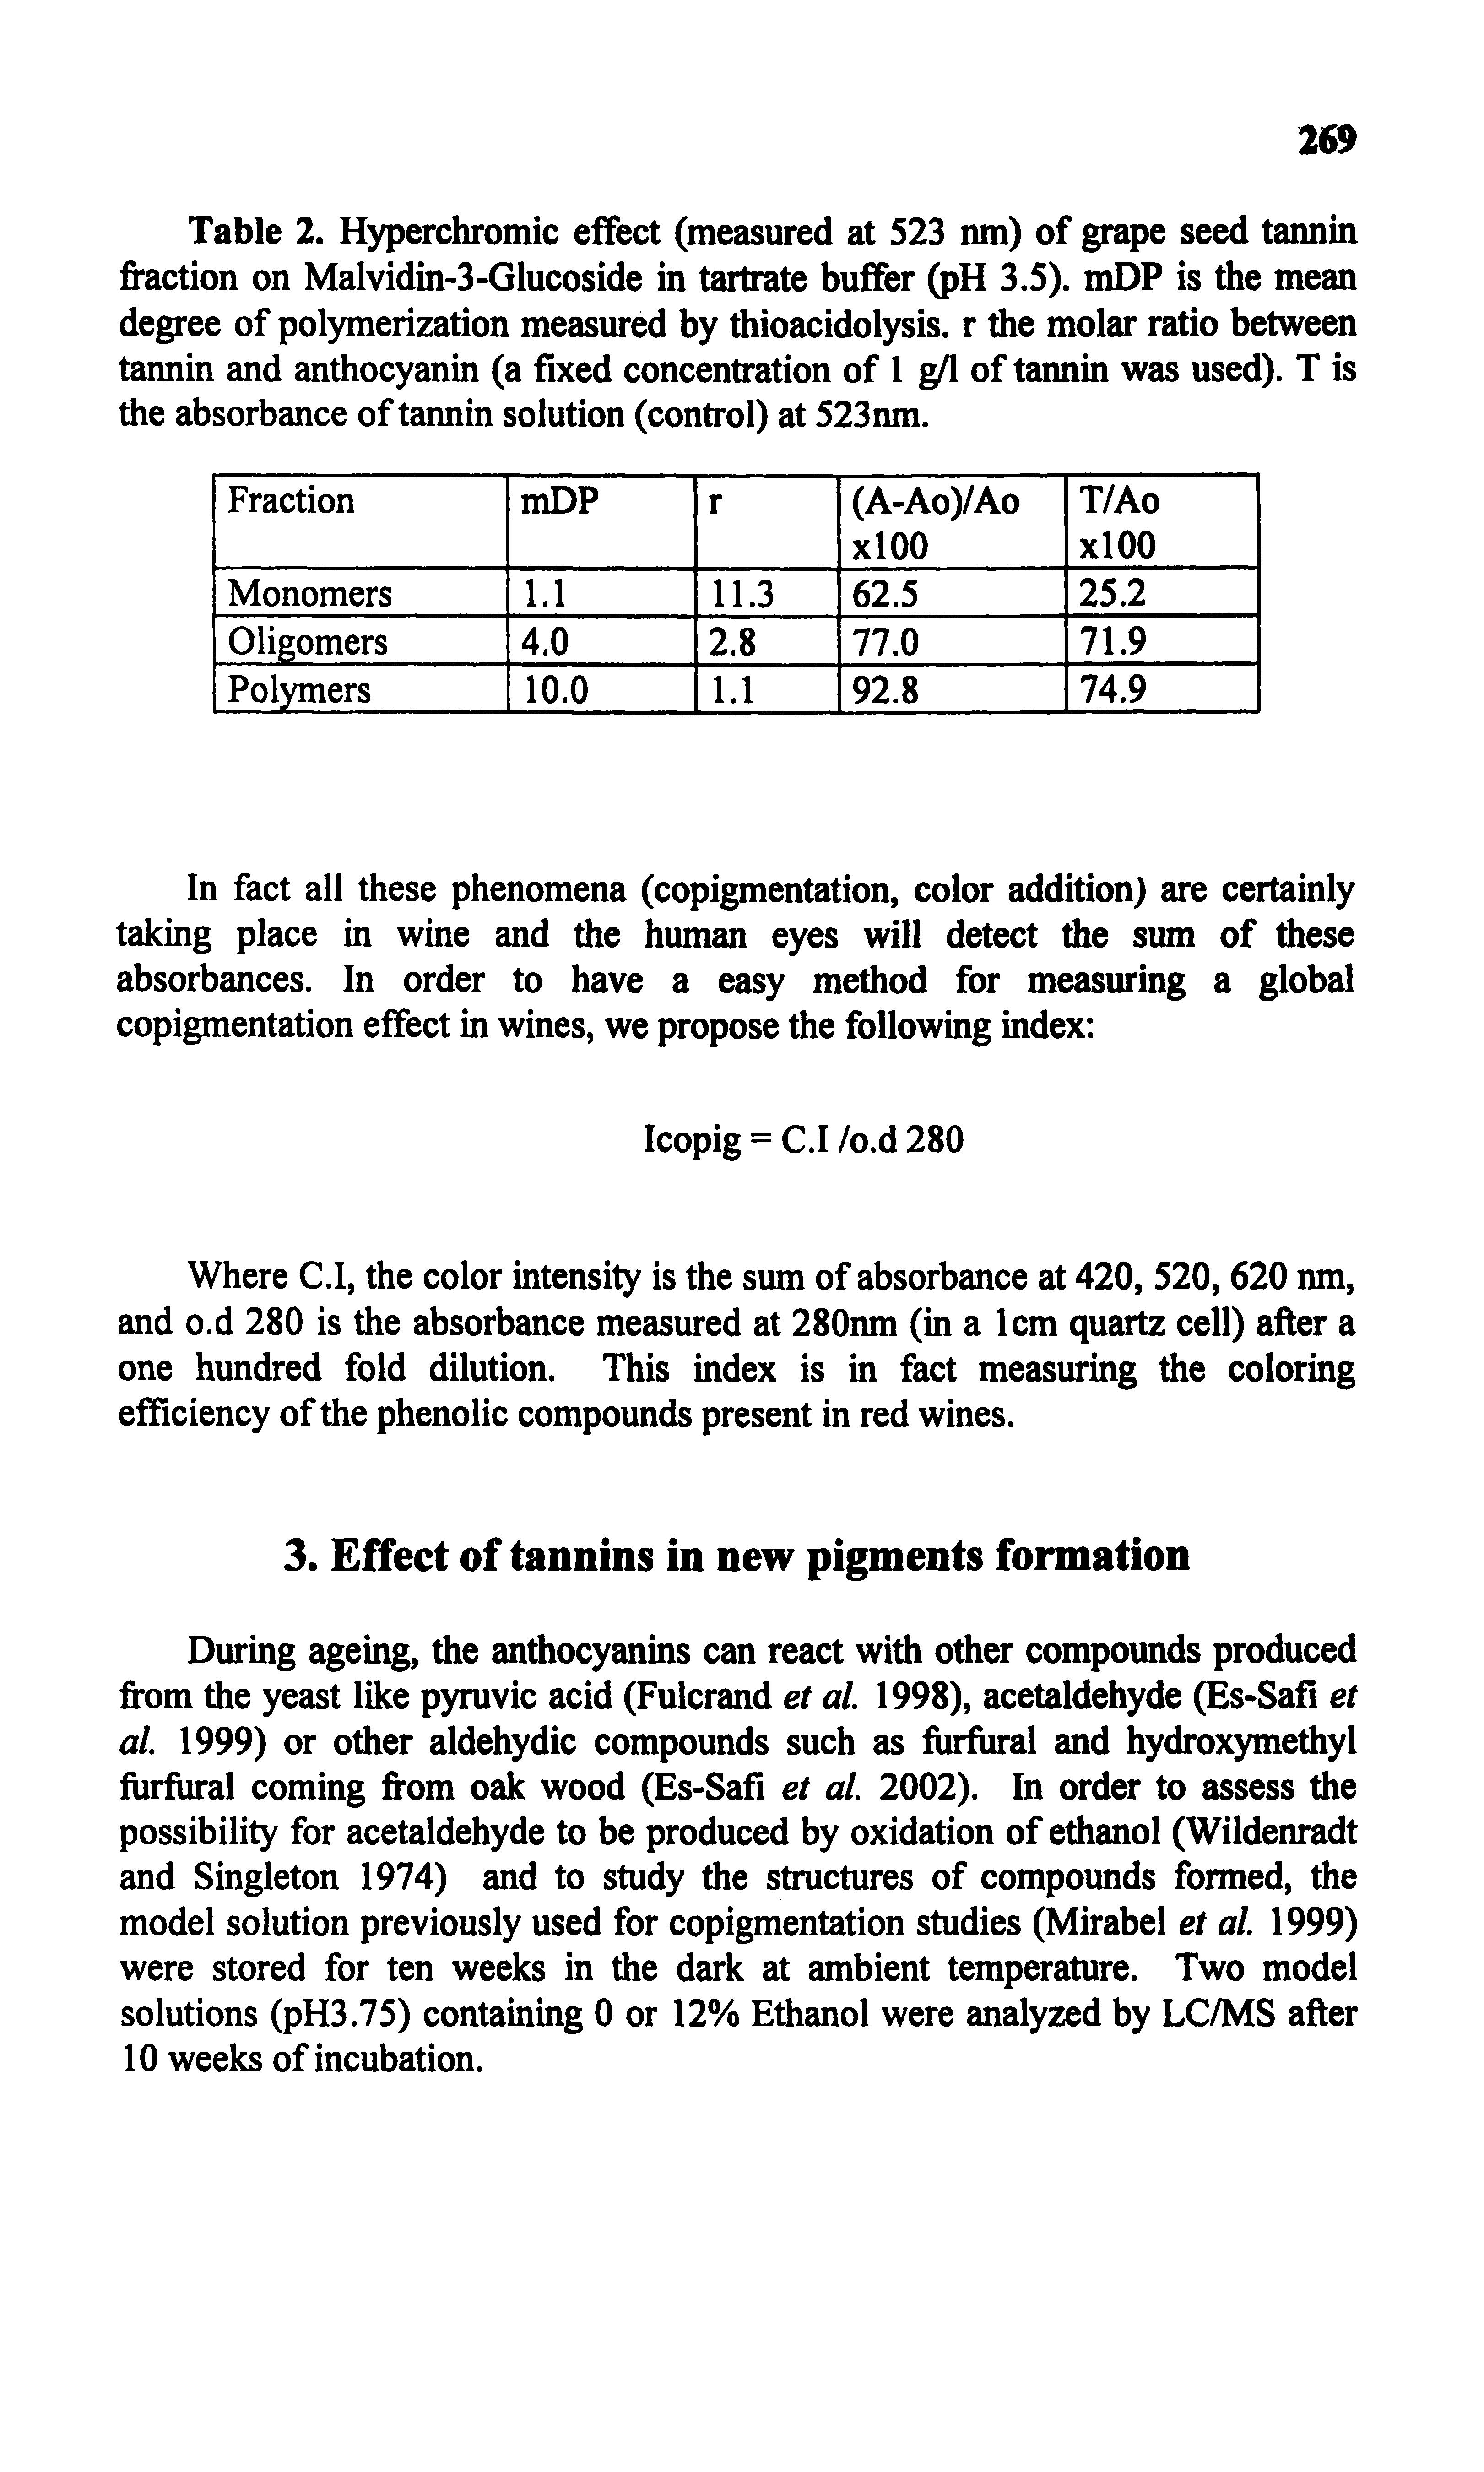 Table 2. Hyperchromic effect (measured at 523 nm) of grape seed tannin fraction on MaIvidin-3-Glucoside in tartrate buffer (pH 3.5). mOP is the mean degree of polymerization measured by diioacidolysis. r the molar ratio between tannin and anthocyanin (a fixed concentration of 1 g/1 of tannin was used). T is the absorbance of tannin solution (control) at 523nm.